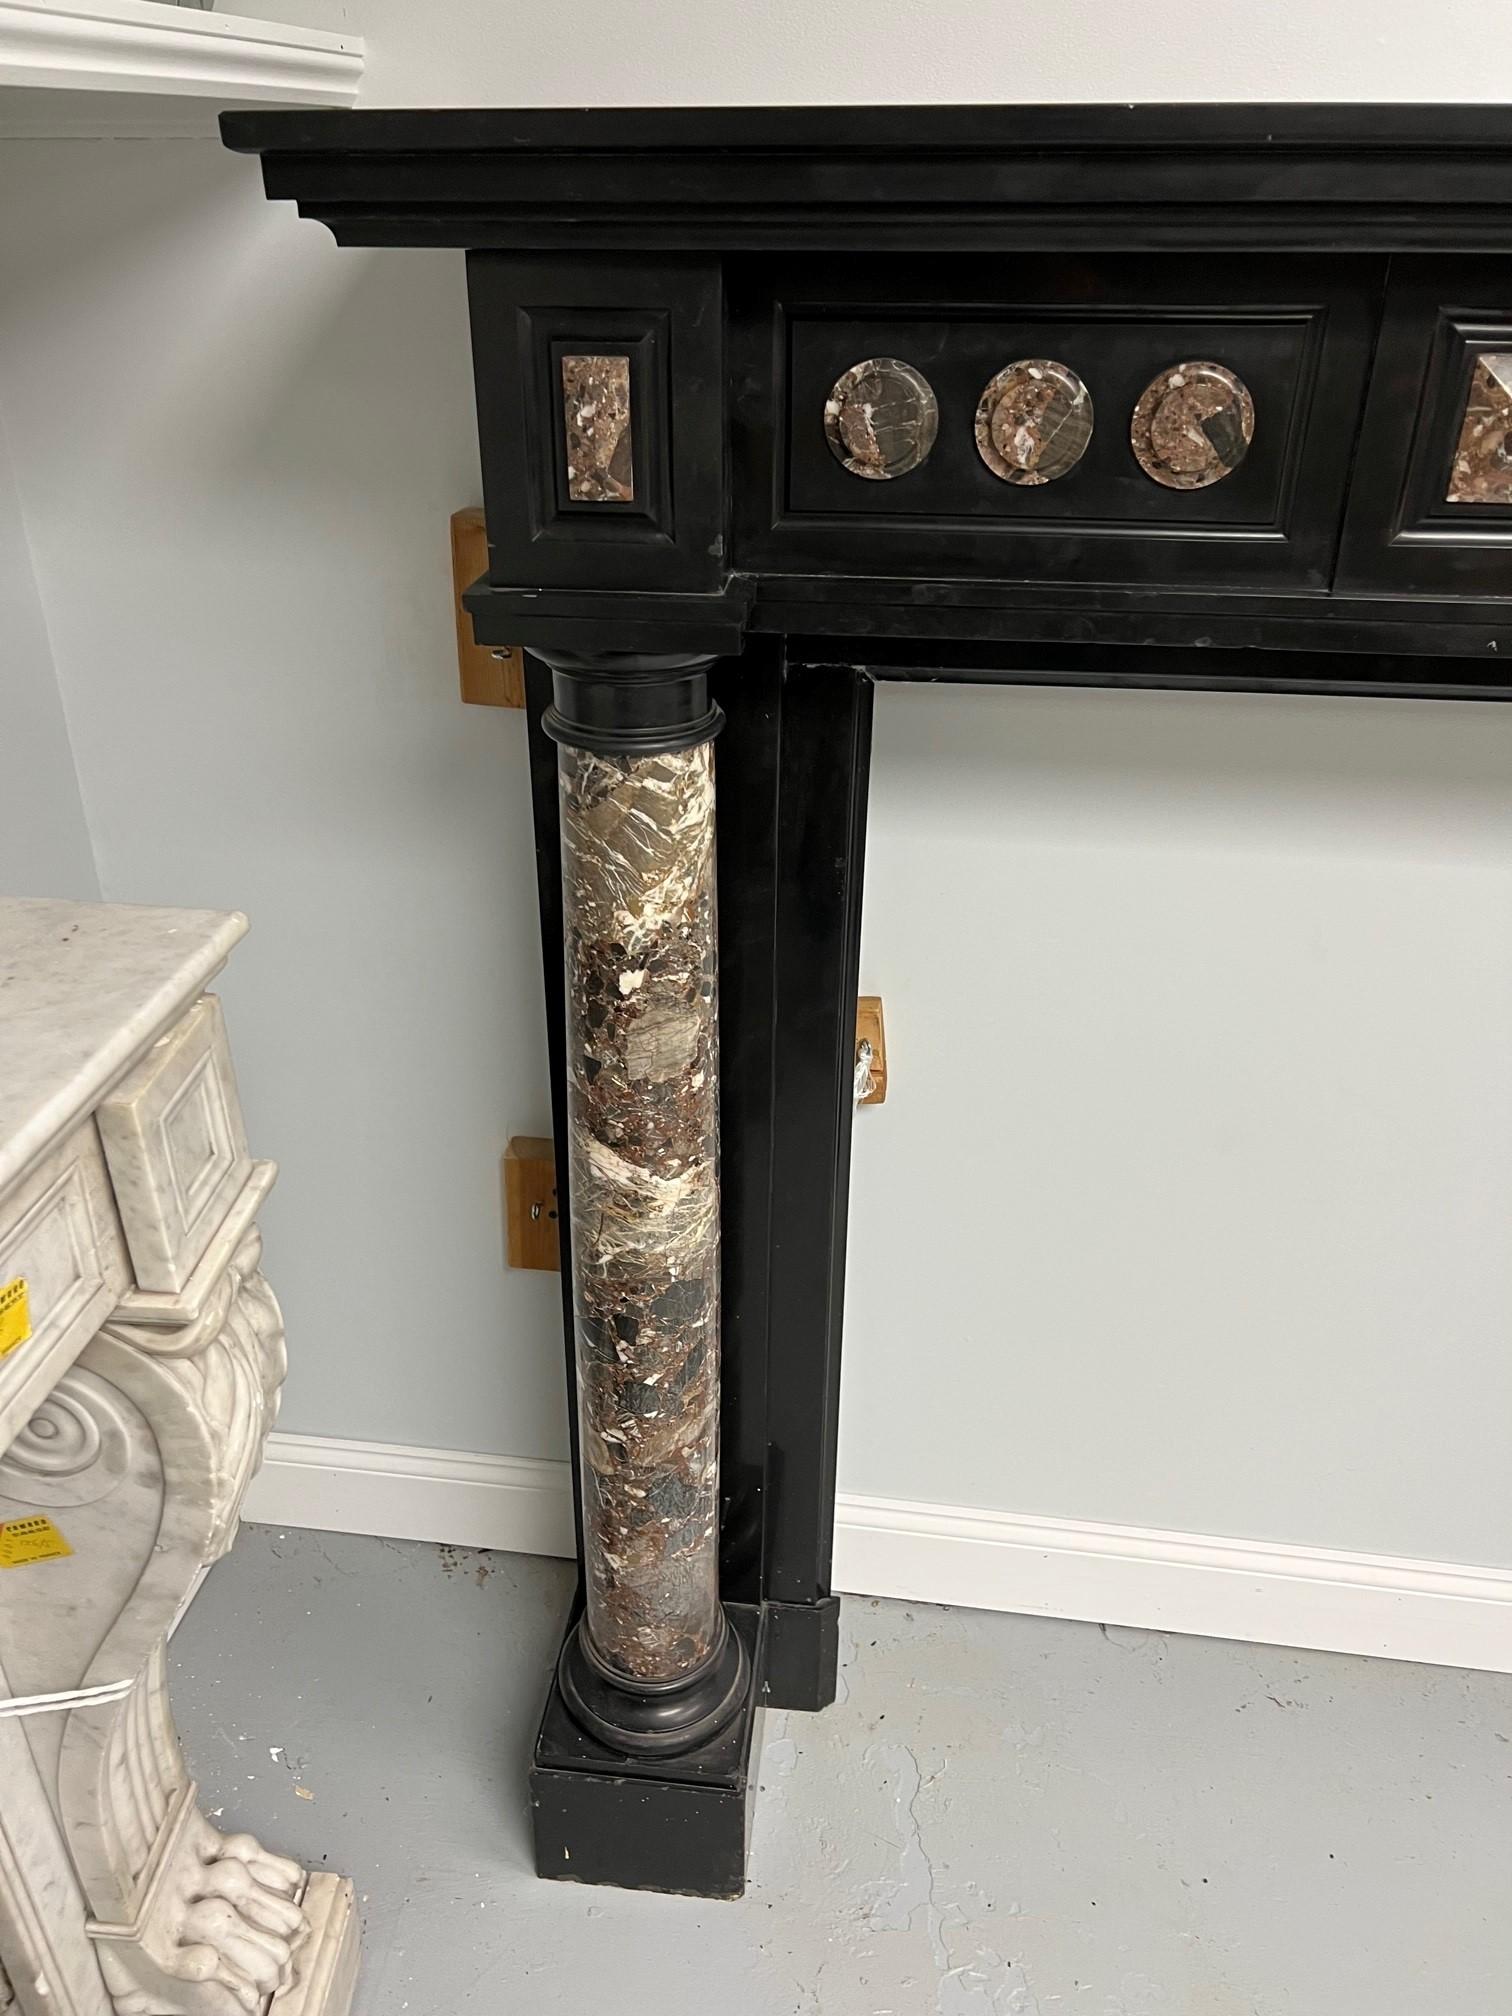 Late 19th century antique Belgian black marble fireplace mantel with marble columns. This is a nice tall mantel and the marble columns have a beautiful pattern with great color tones. Salvaged years ago from an estate in France outside of Paris and